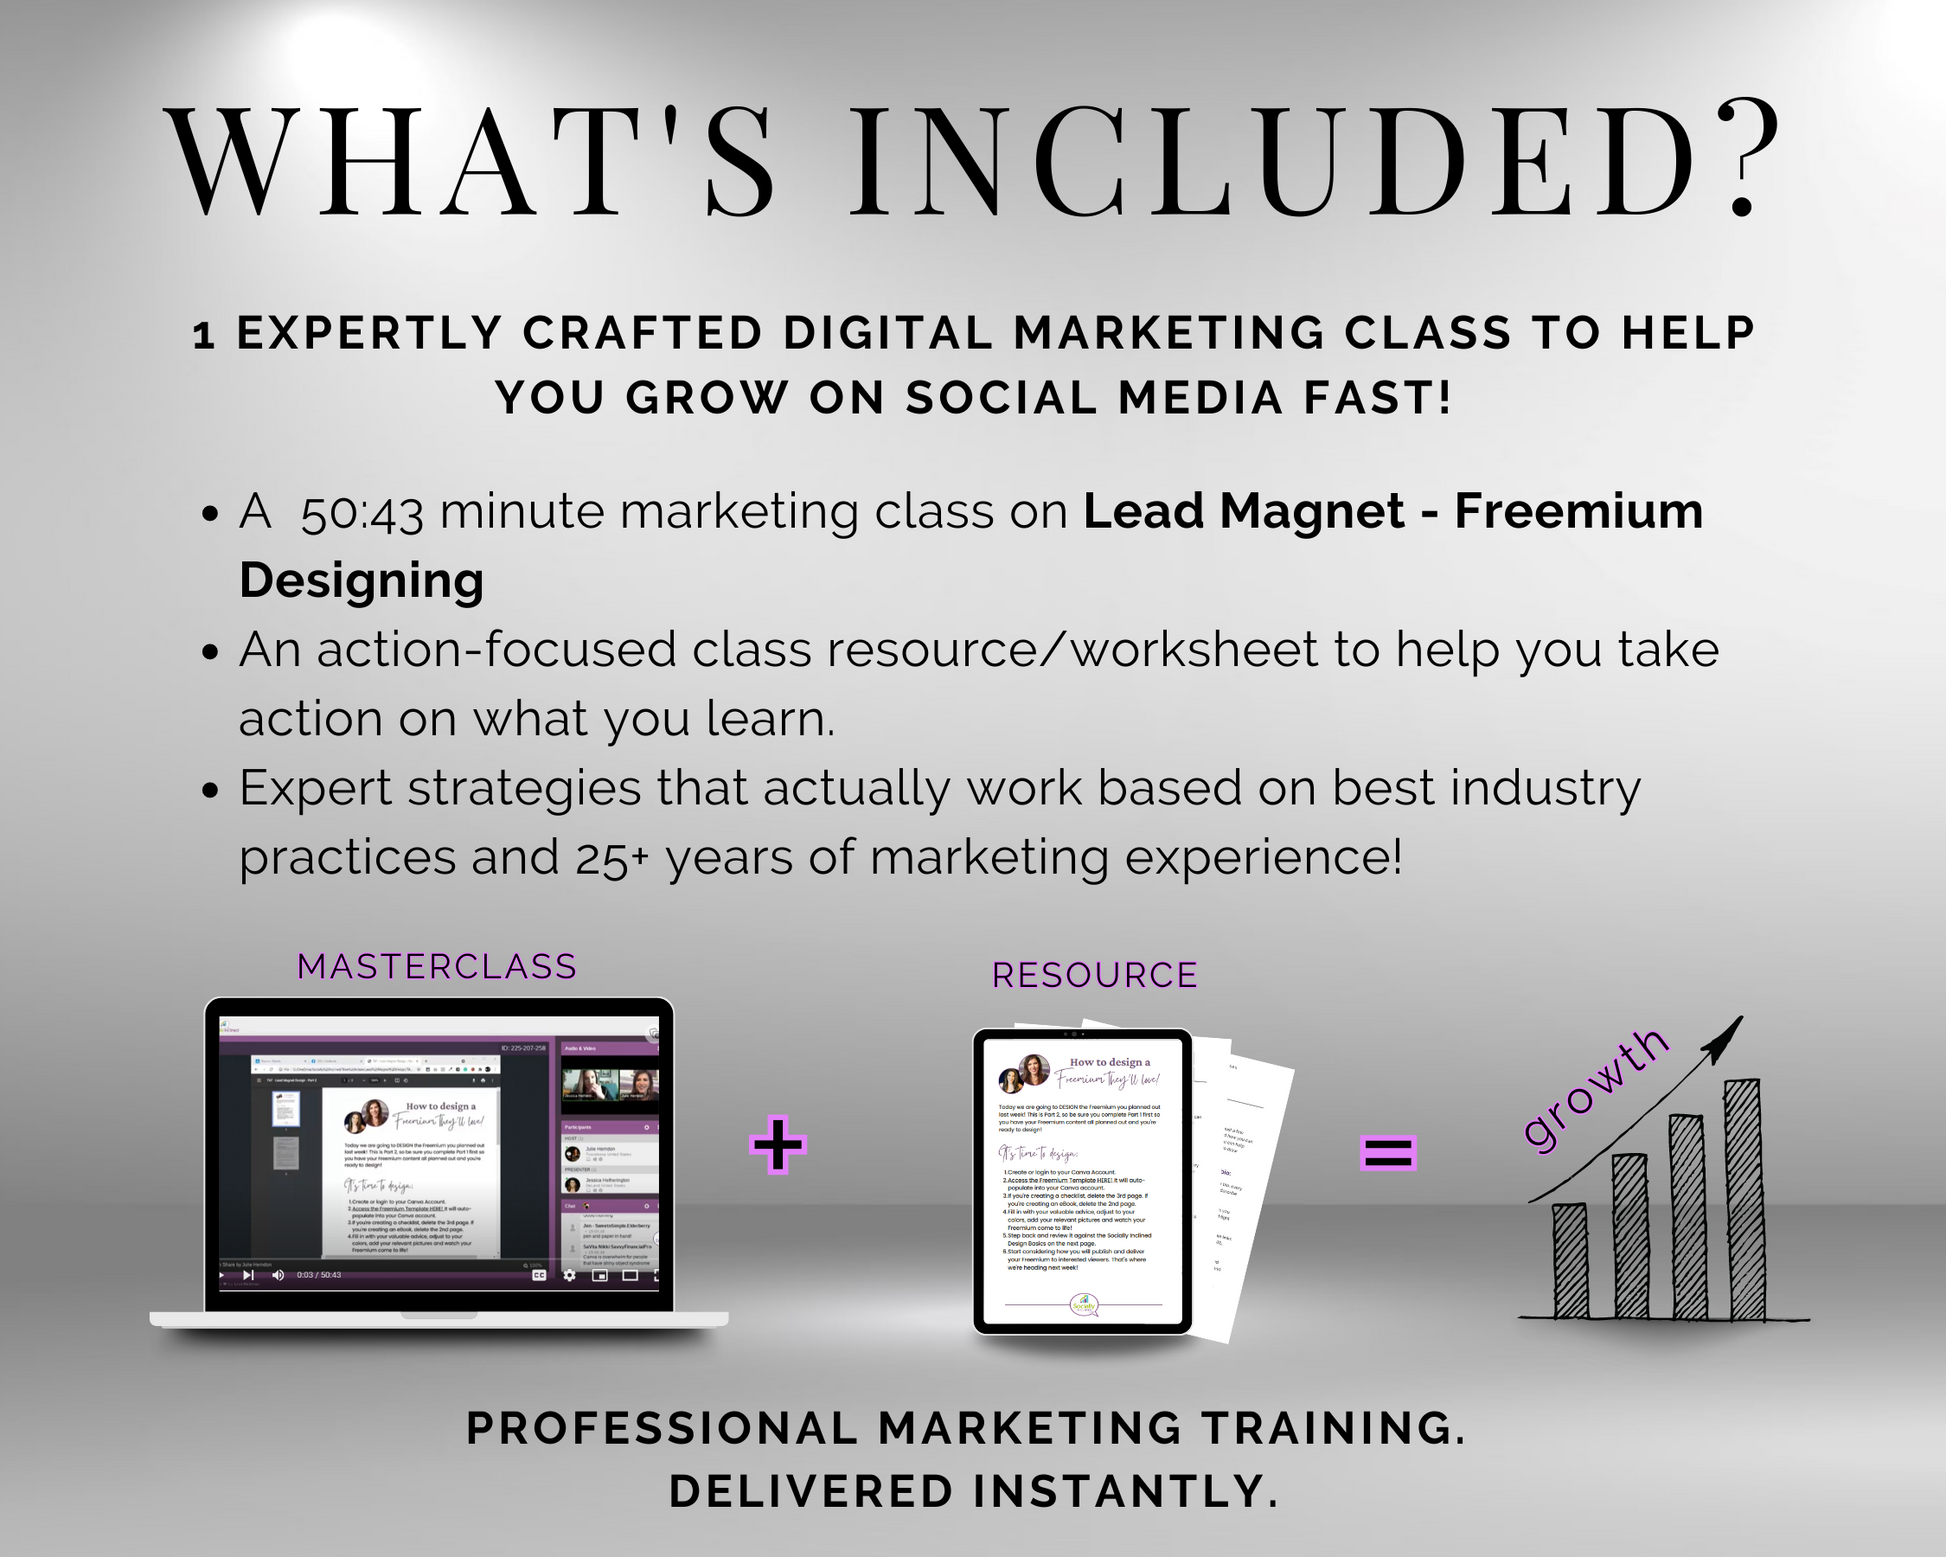 What's included in the TAT - Lead Magnet - Freemium Designing Masterclass by Get Socially Inclined?